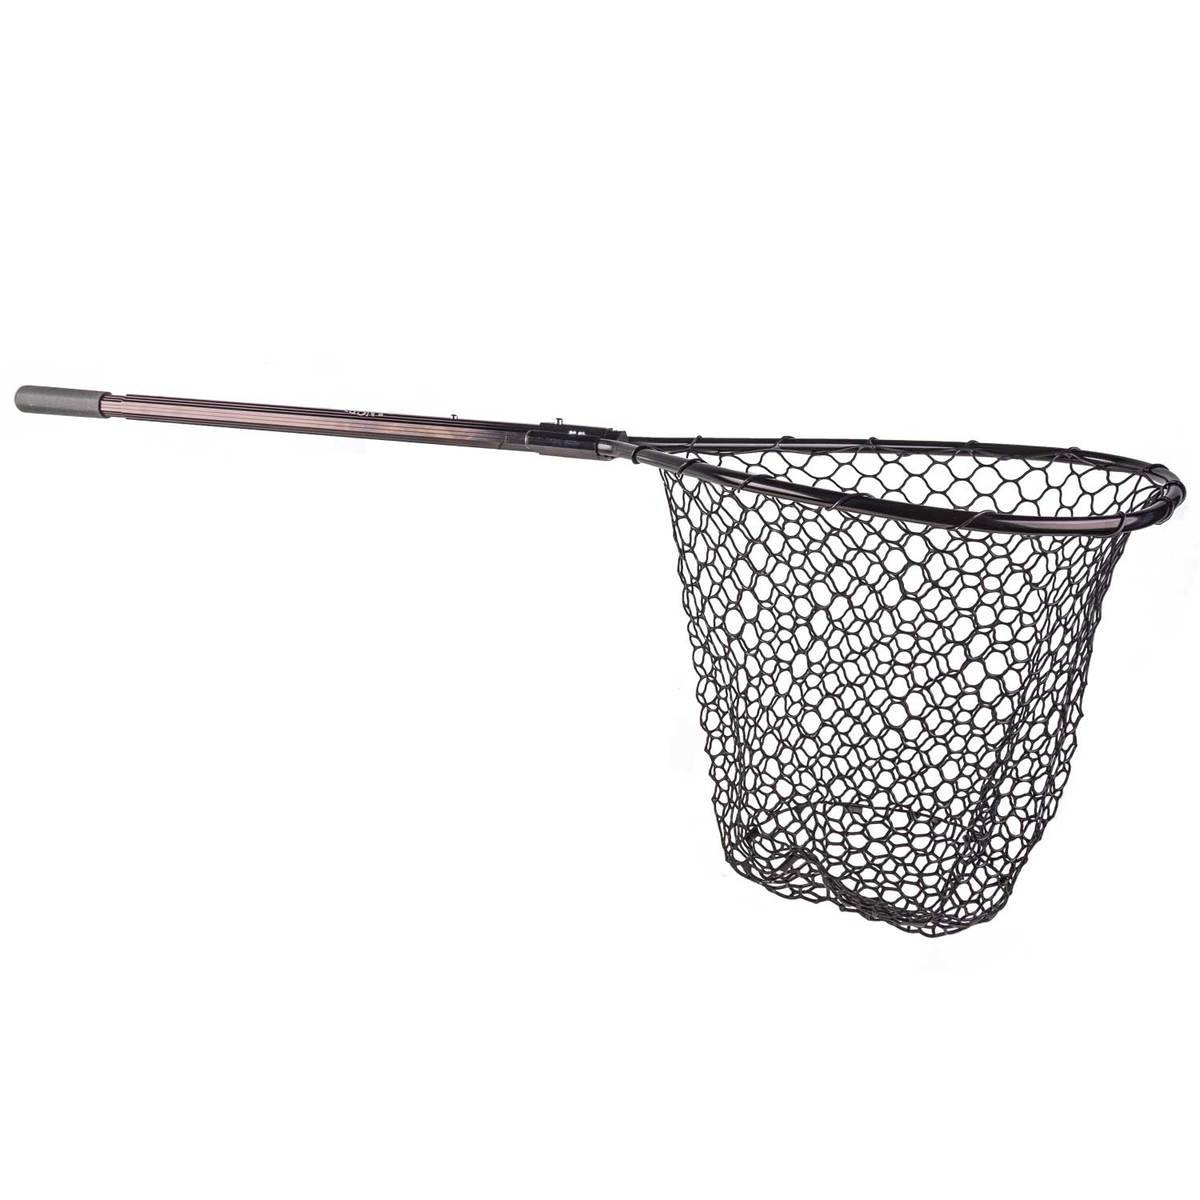 Ranger Products Tournament Series Rubber 29in-45in Landing Net